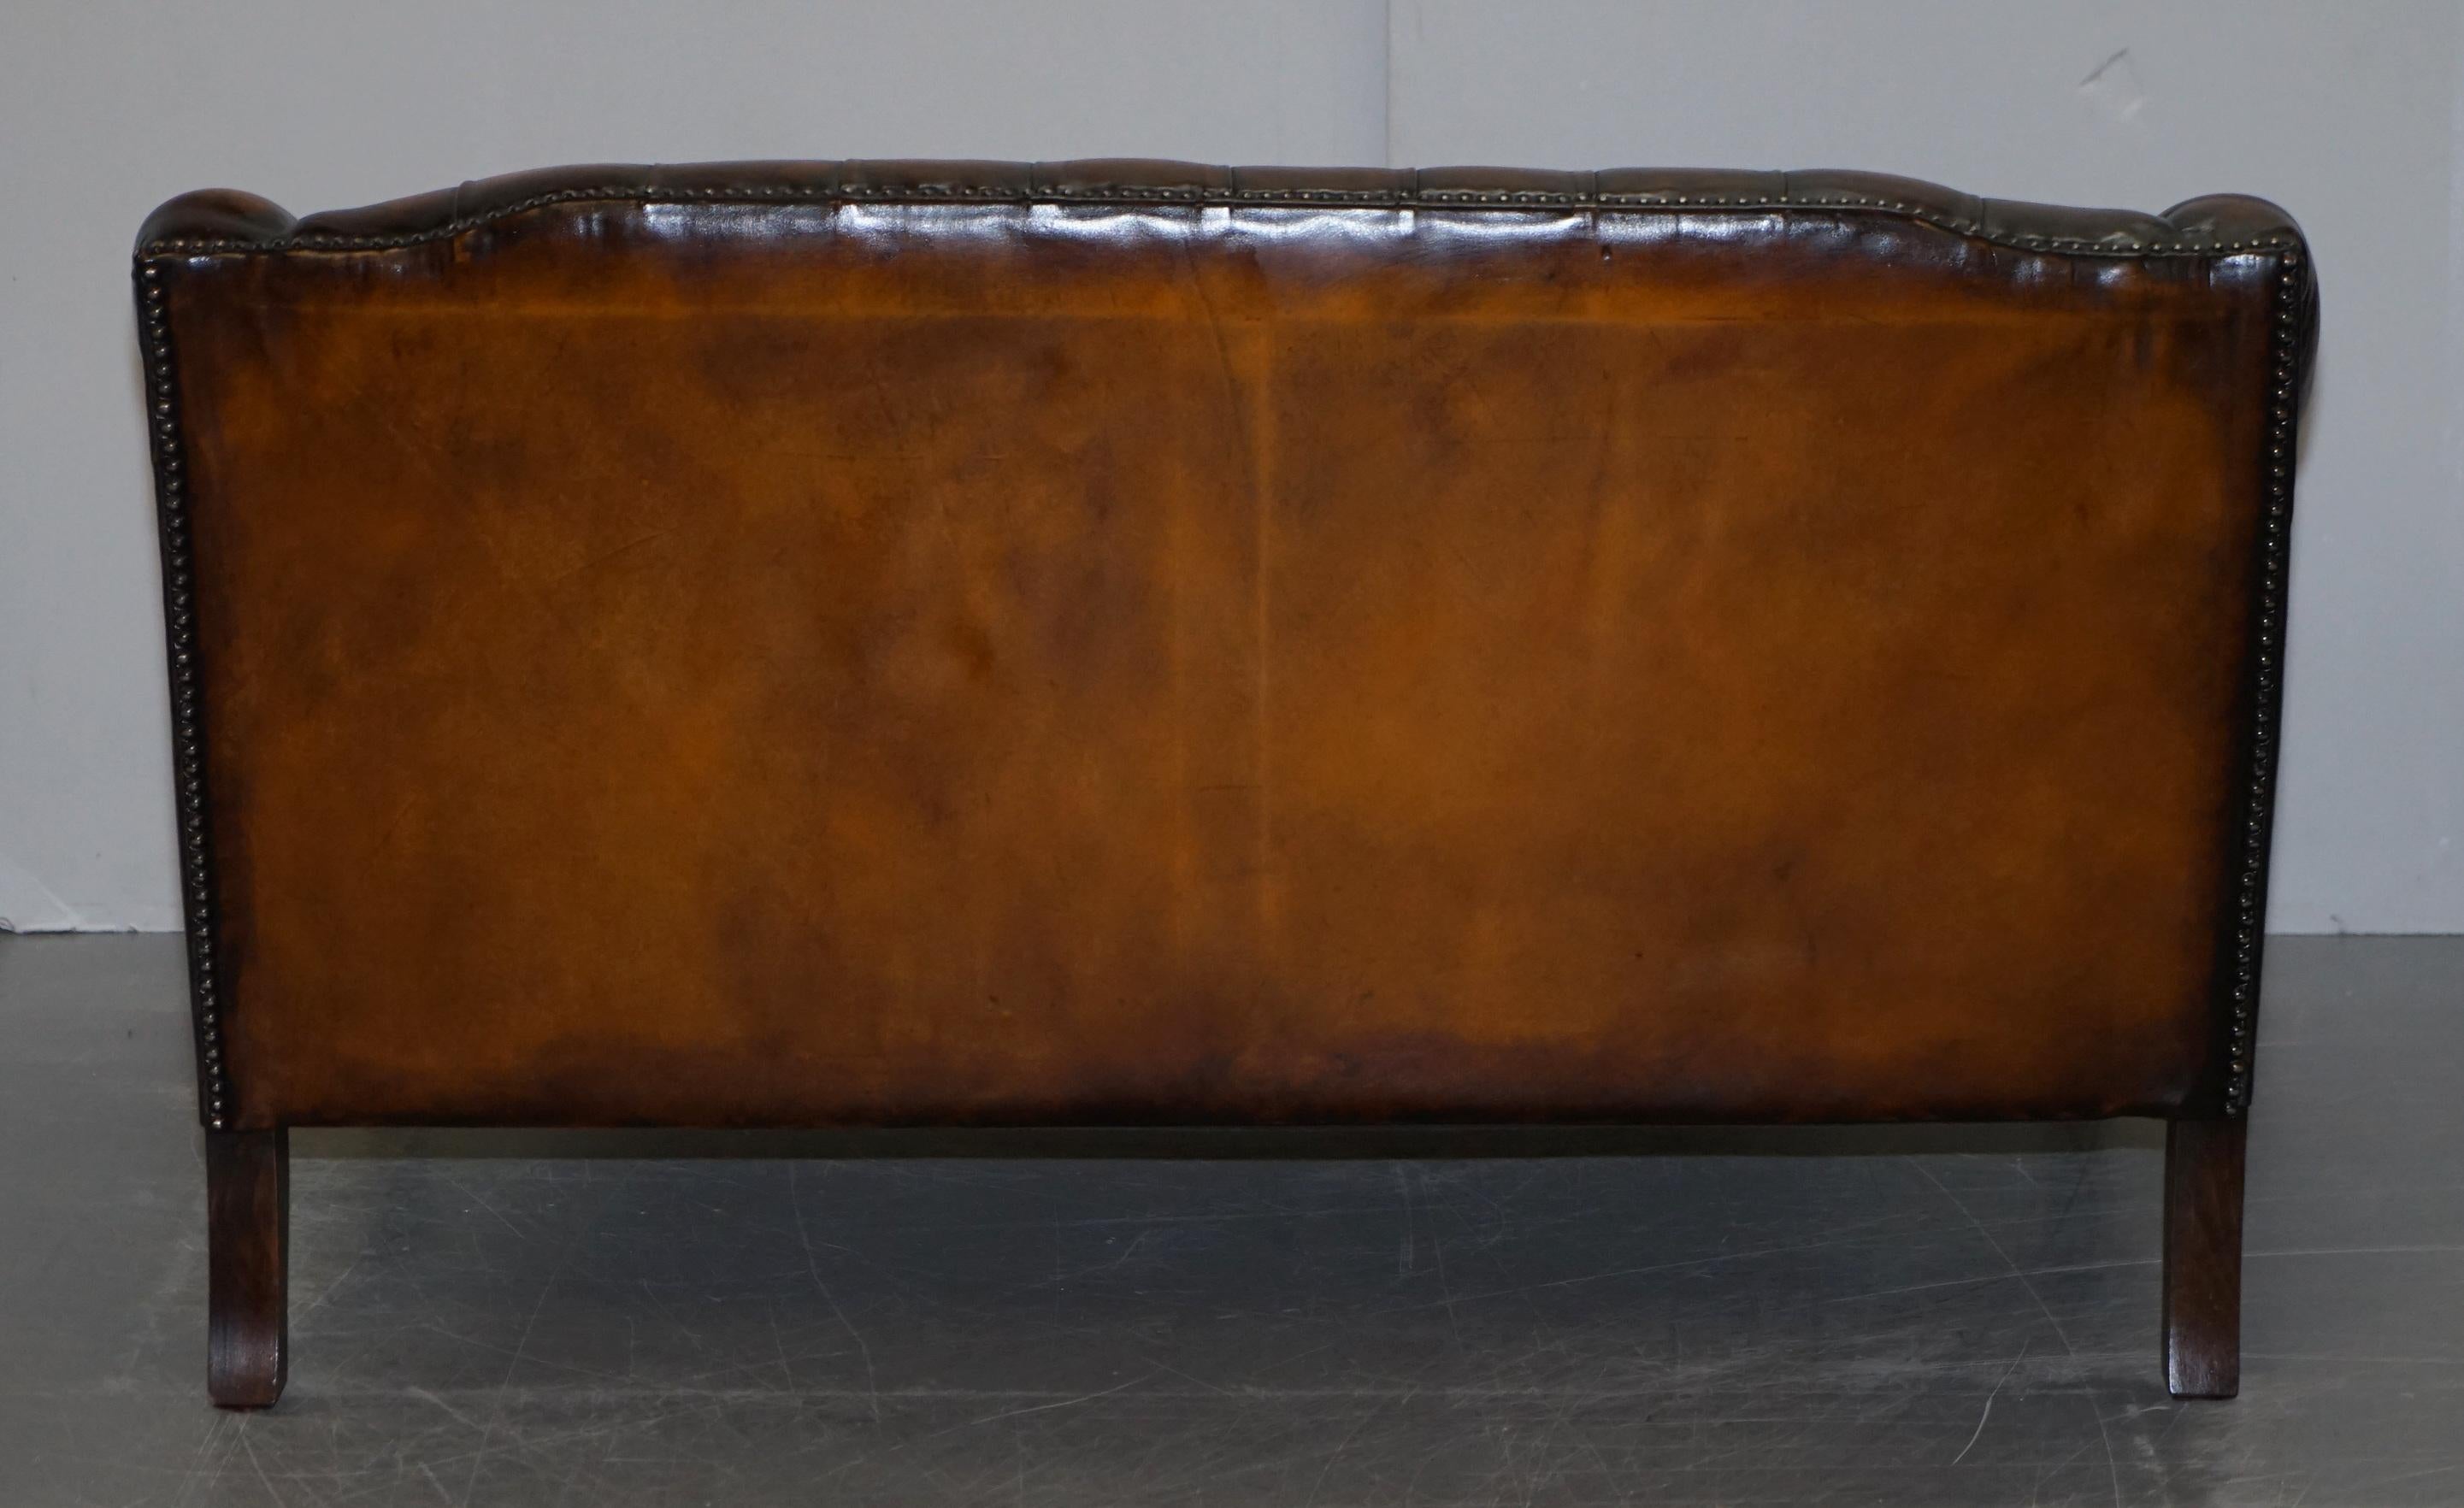 Restored Lutyen's Viceroy Style Chesterfield Brown Leather Hand Dyed 2-Seat Sofa 9